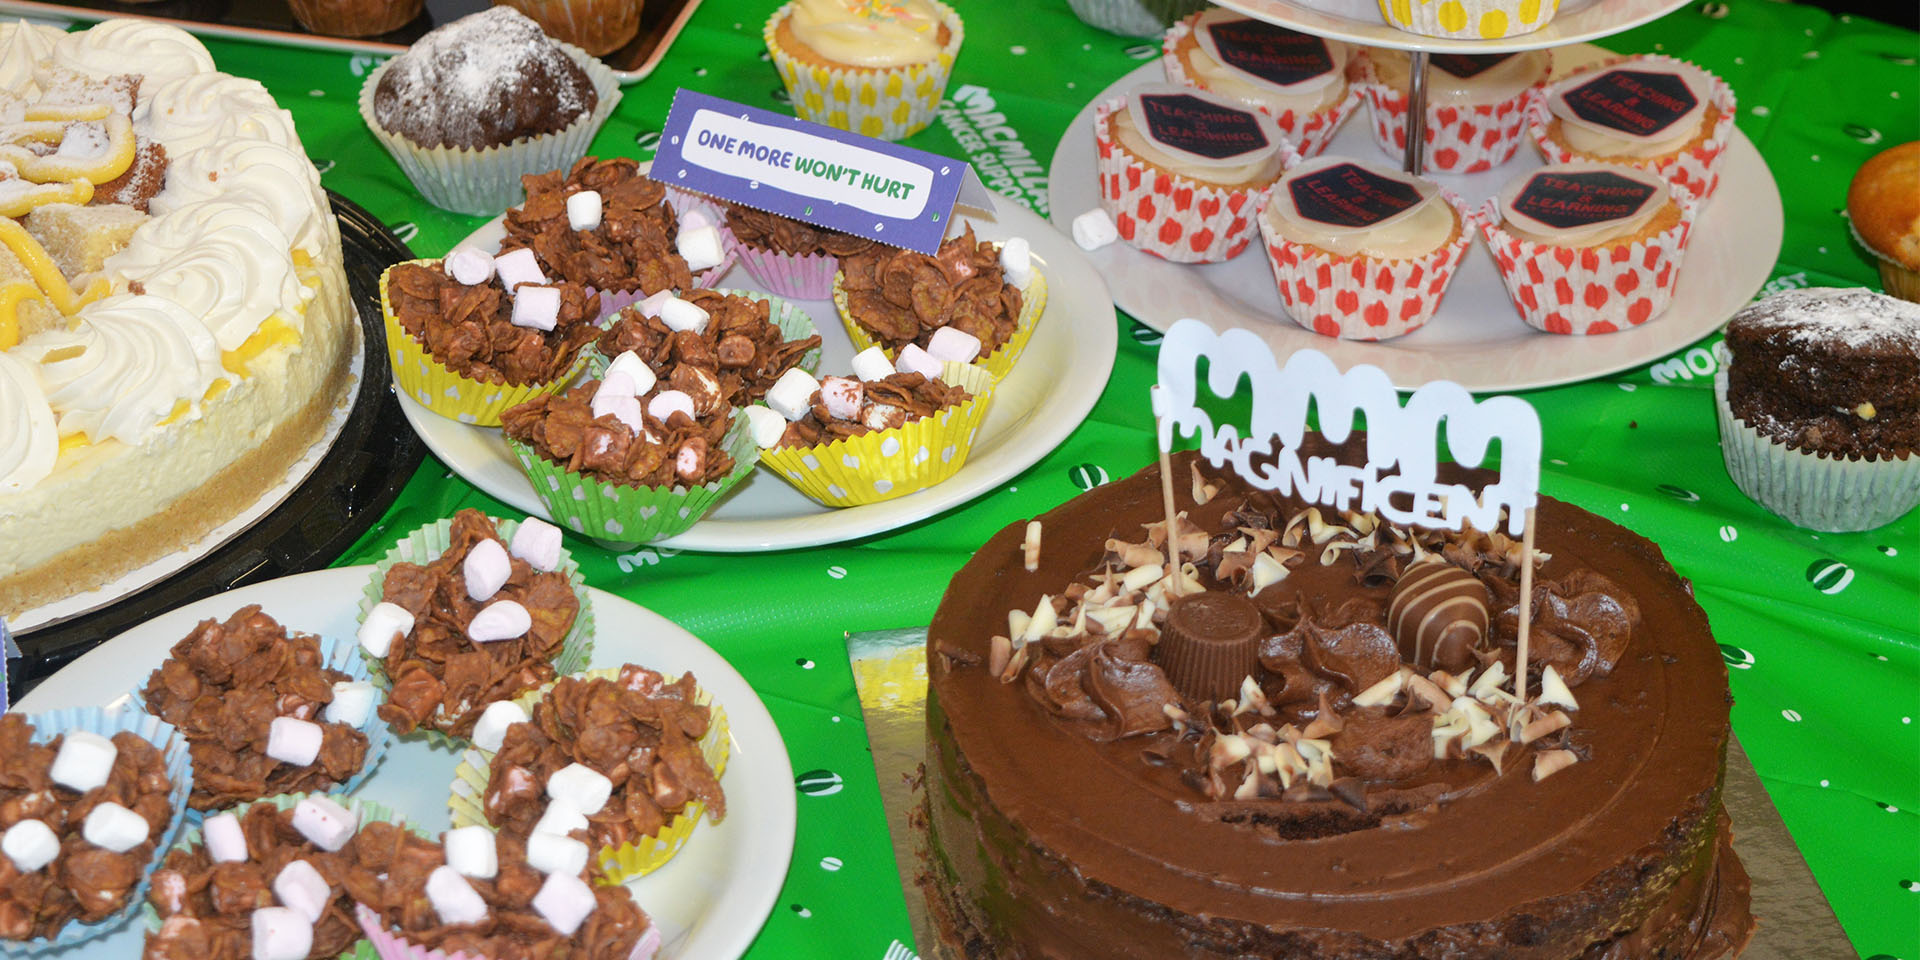 Coffee Morning for Macmillan Cancer Support